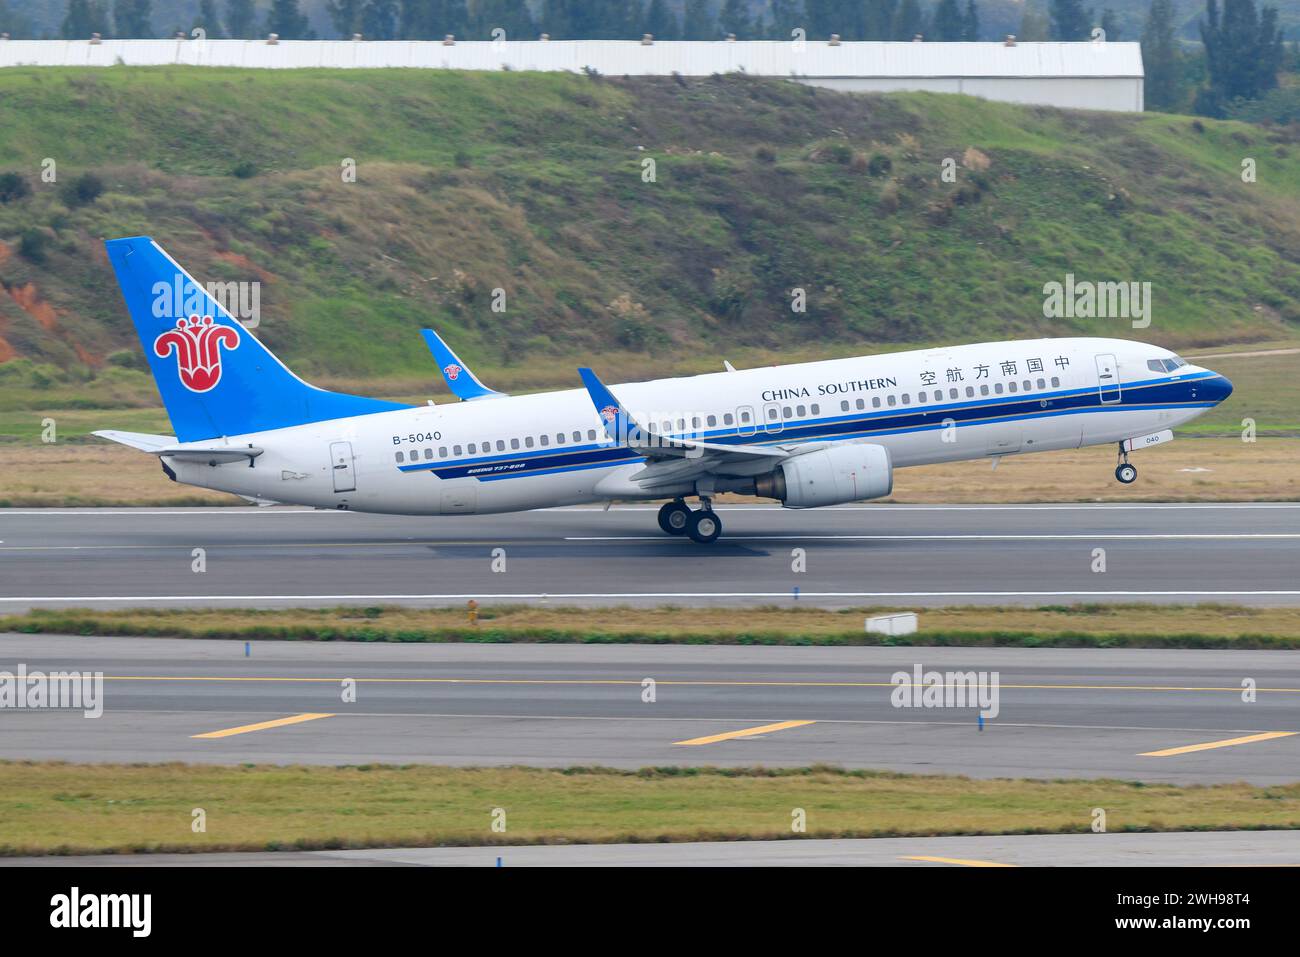 China Southern Airlines Boeing 737 aircraft taking off. Airplane Boeing 737-800 of China Southern airline. Plane of China Southern departing. Stock Photo